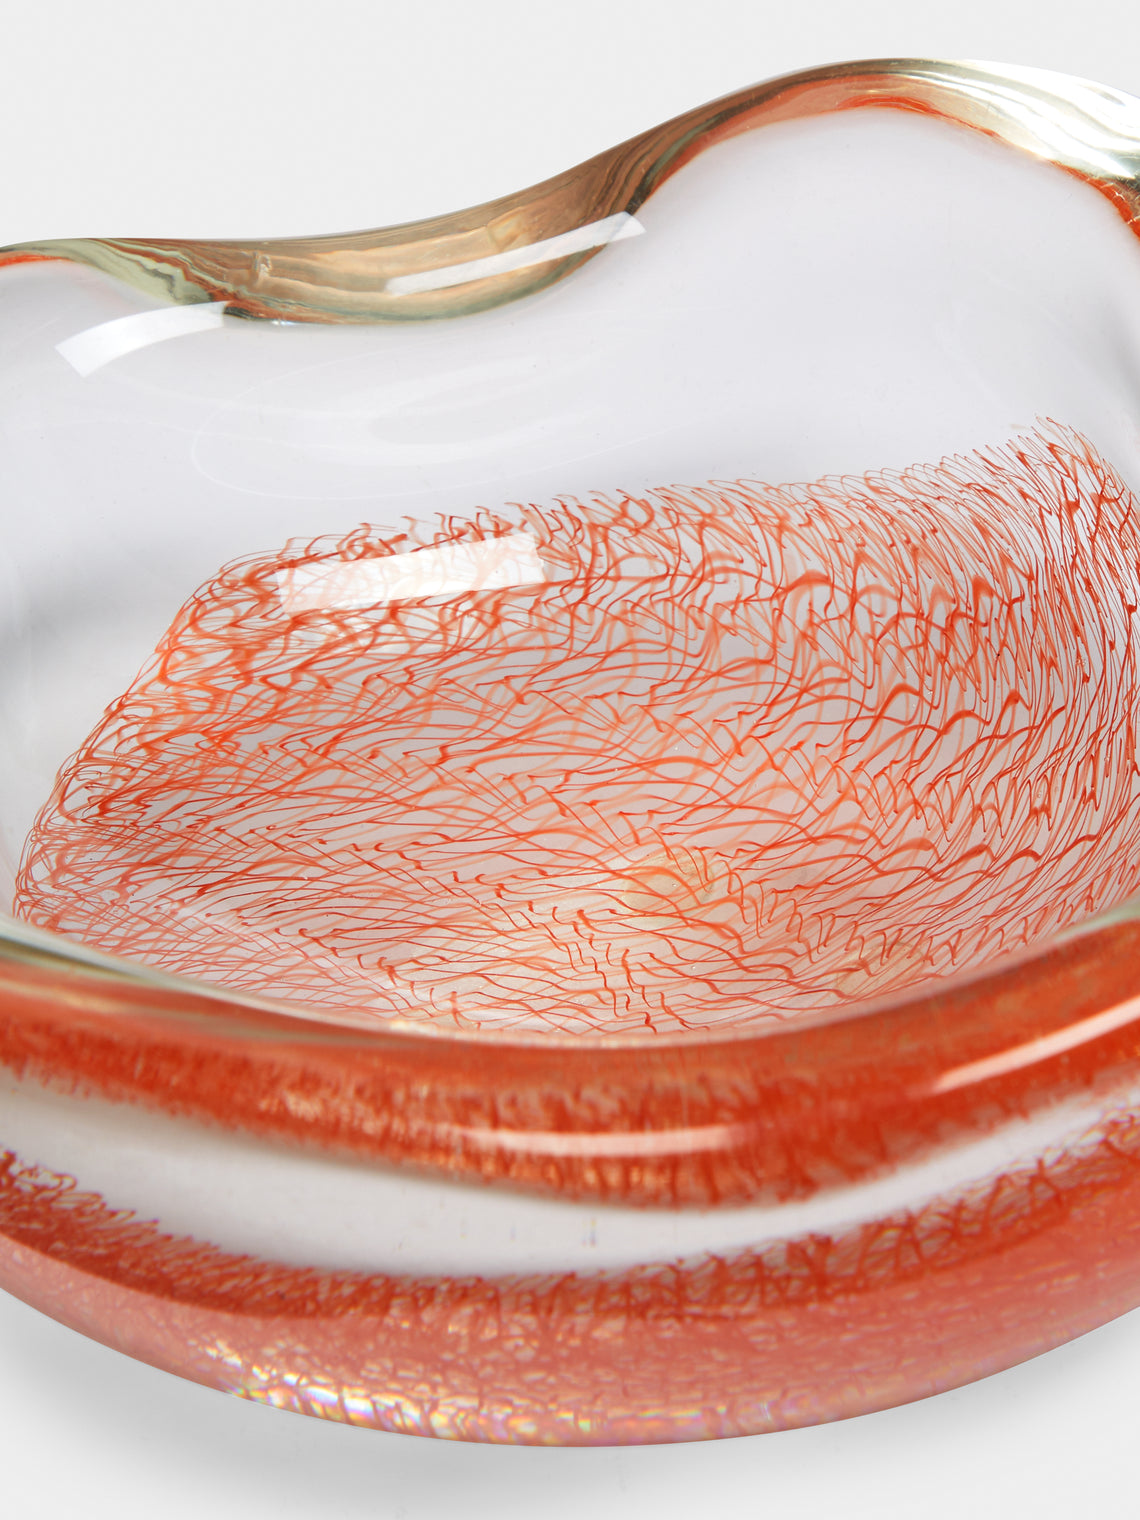 Antique and Vintage - 1950s Seguso Merletto Murano Glass Bowl (Set of 2) - Orange - ABASK